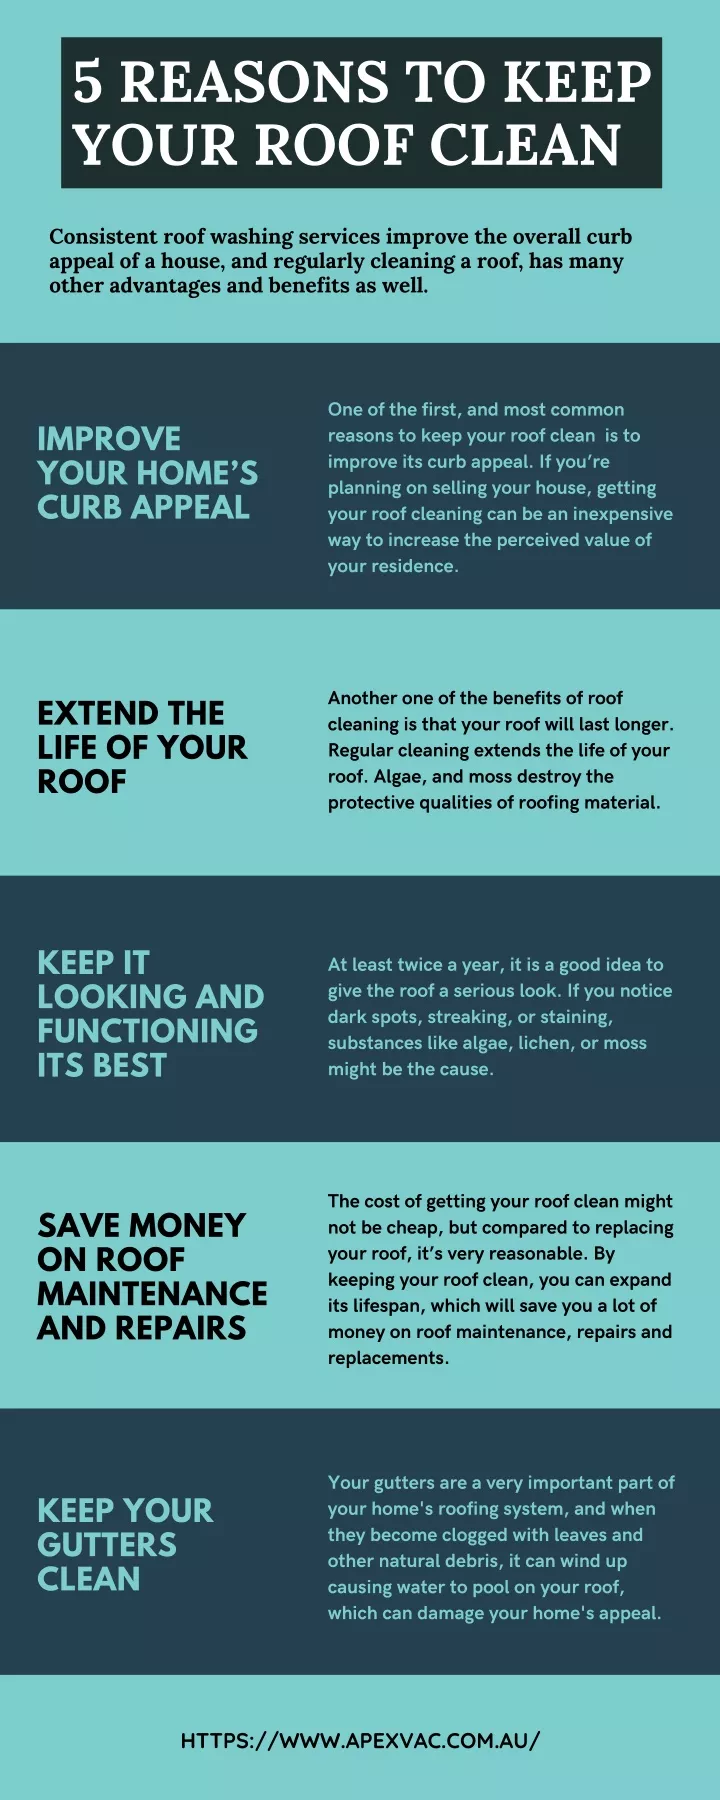 5 reasons to keep your roof clean